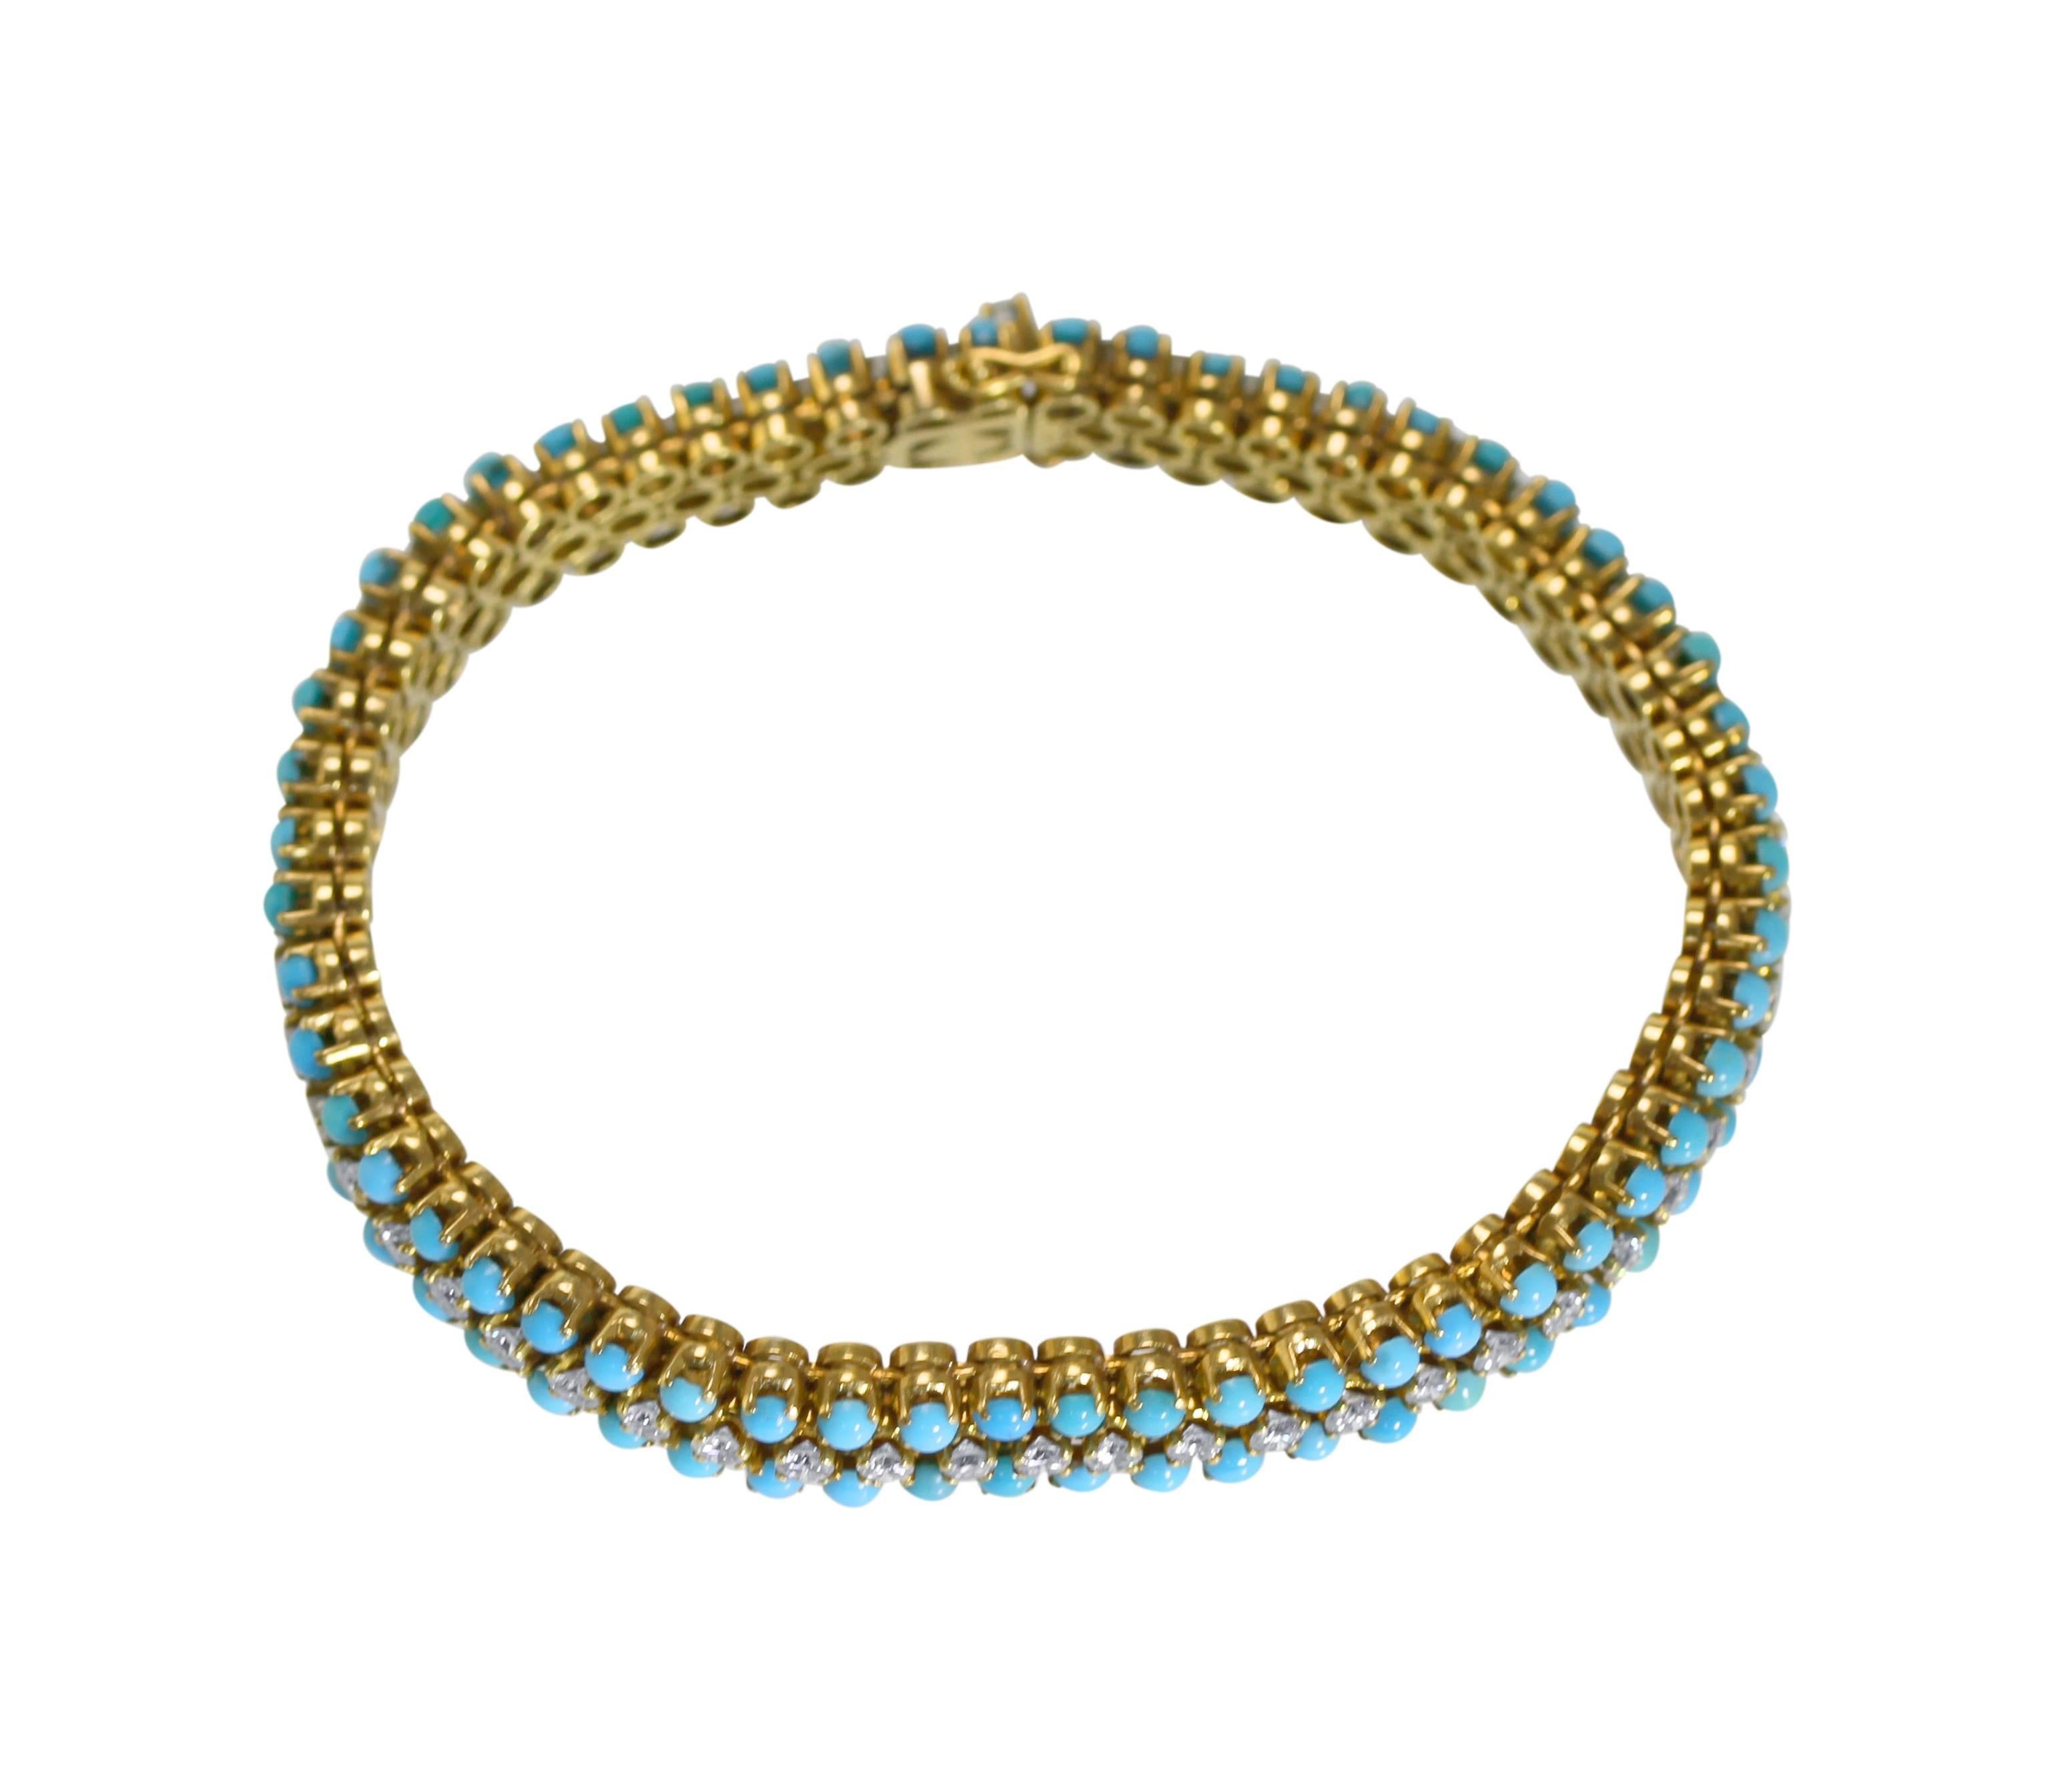 An 18 karat yellow gold, turquoise and diamond bracelet by Bulgari, Italy, circa 1970, designed as a straightline set with a row of 55 round diamonds weighing approximately 3.85 carats, flanked by two rows of 110 round cabochon turquoise measuring